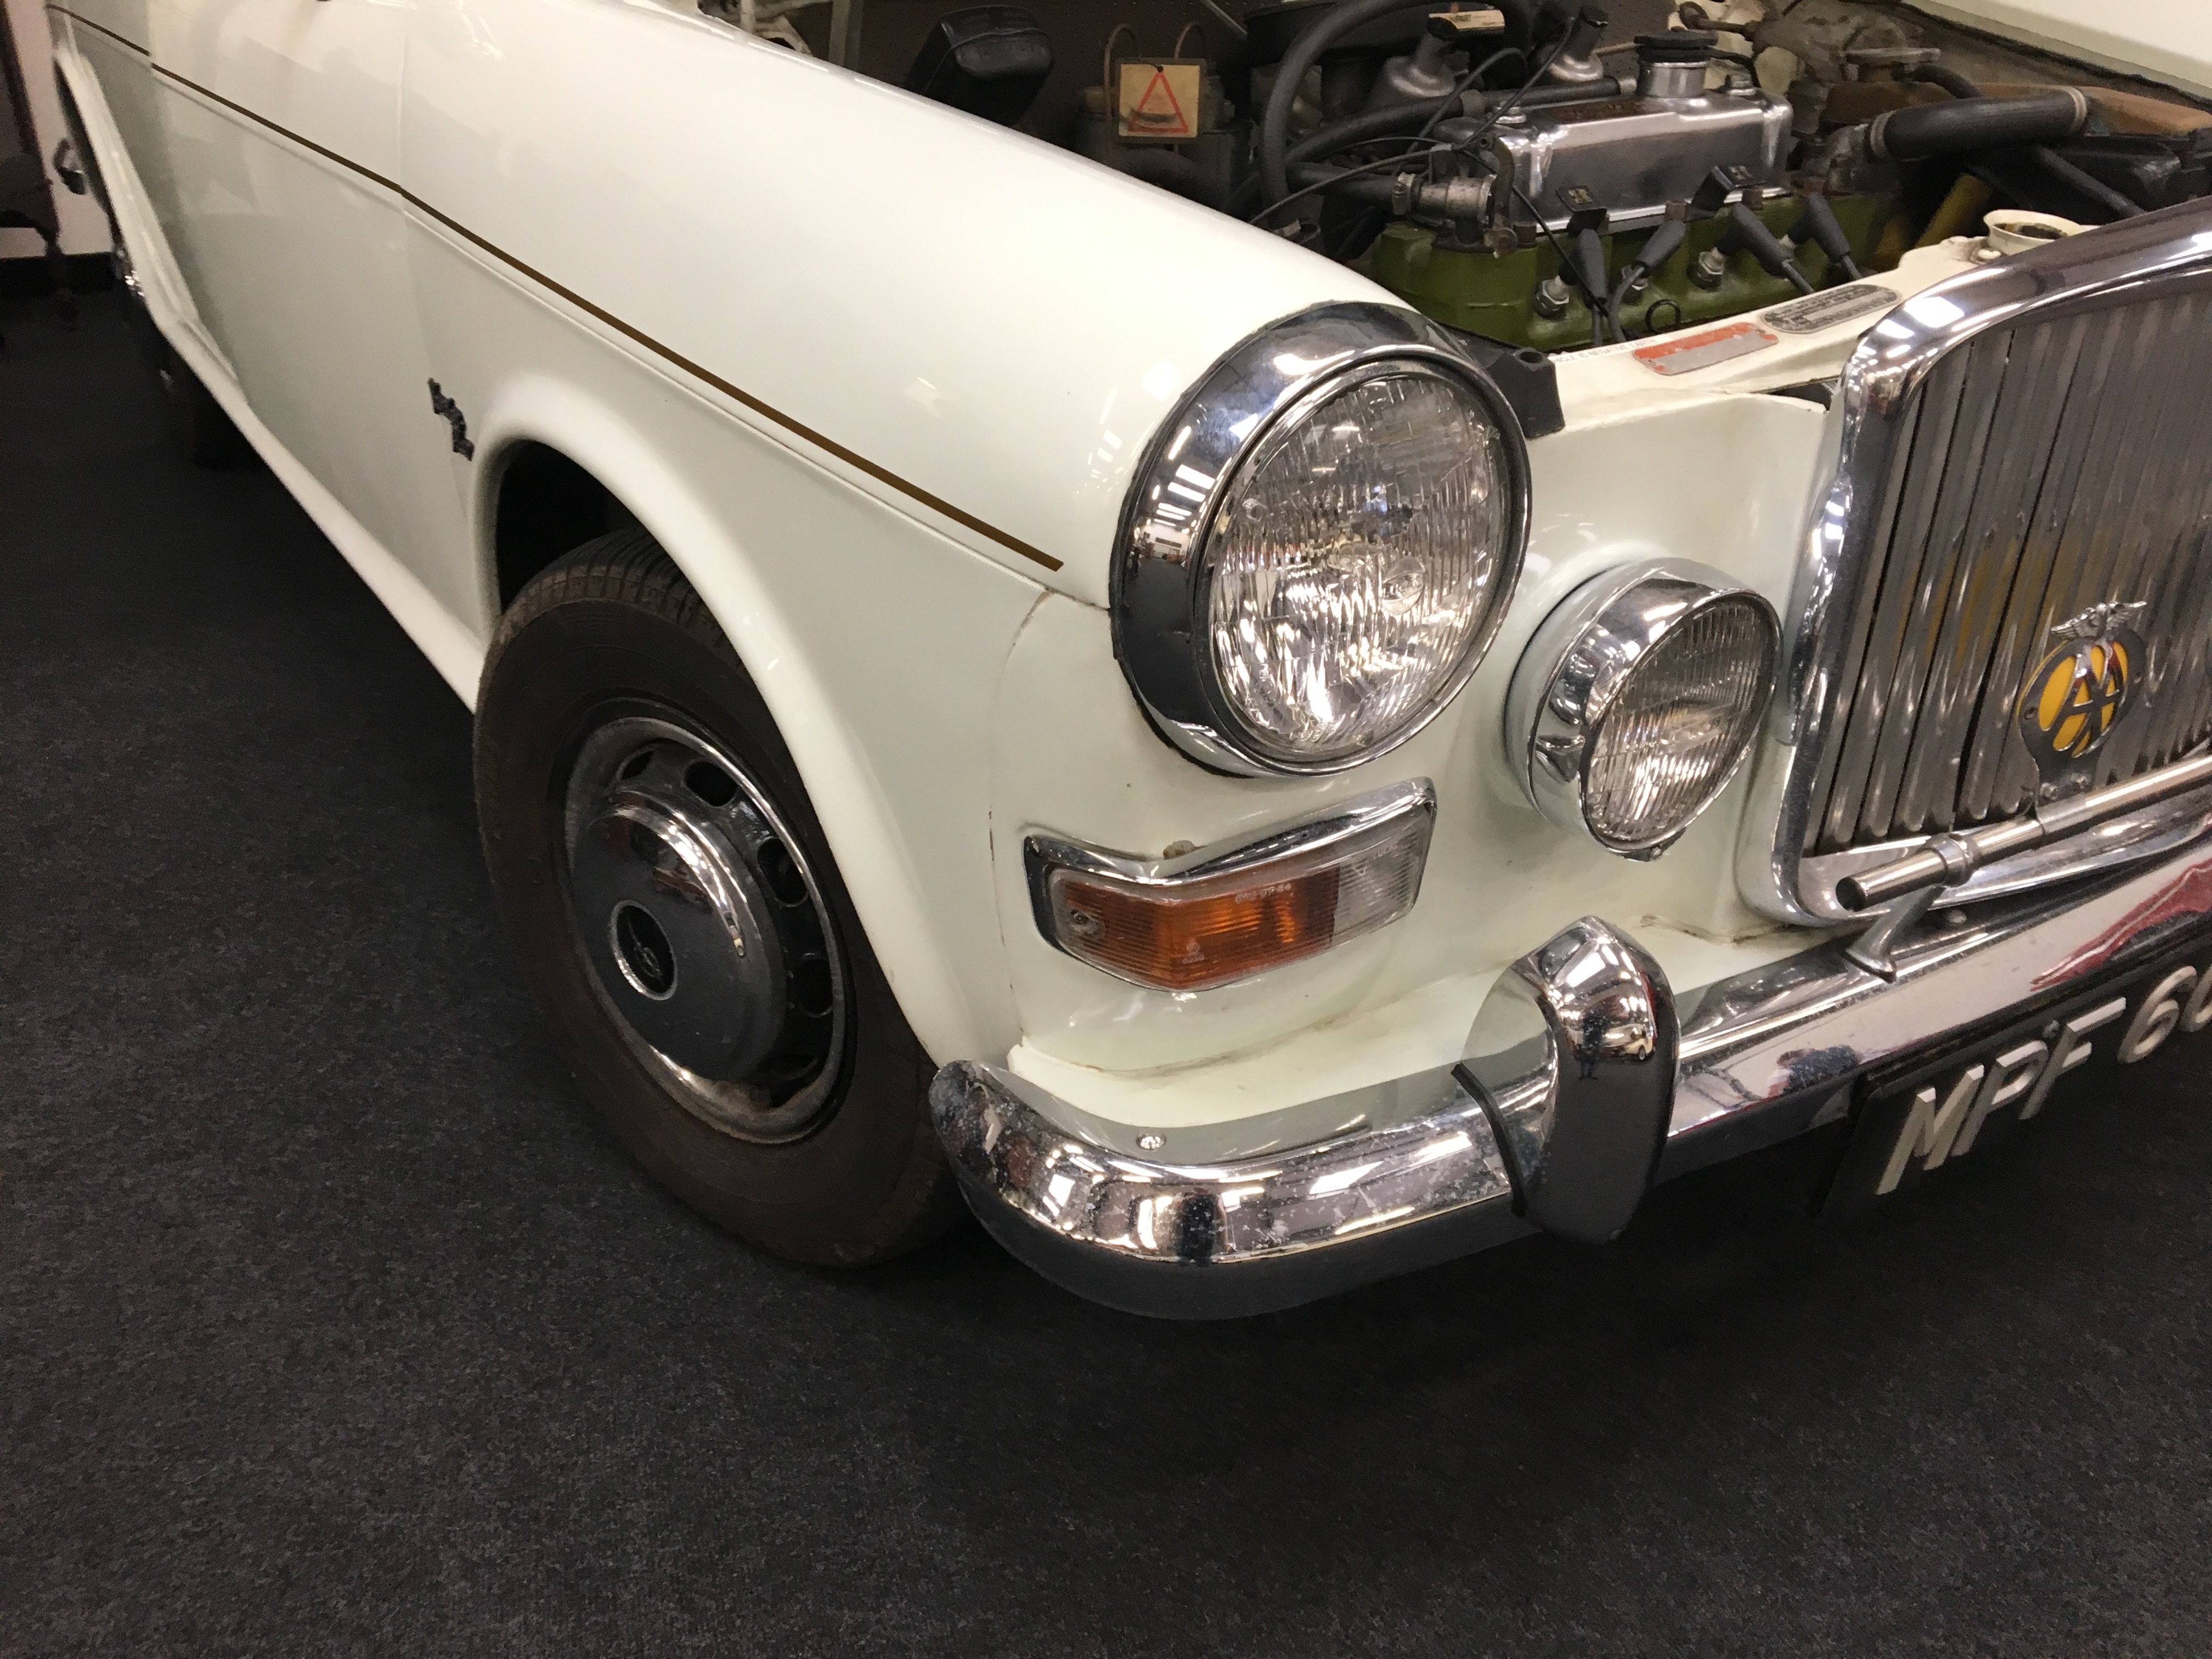 A 1972 Vanden plas princess fitted with a 1275cc engine fitted with twin carburettors, quick shift - Image 3 of 11